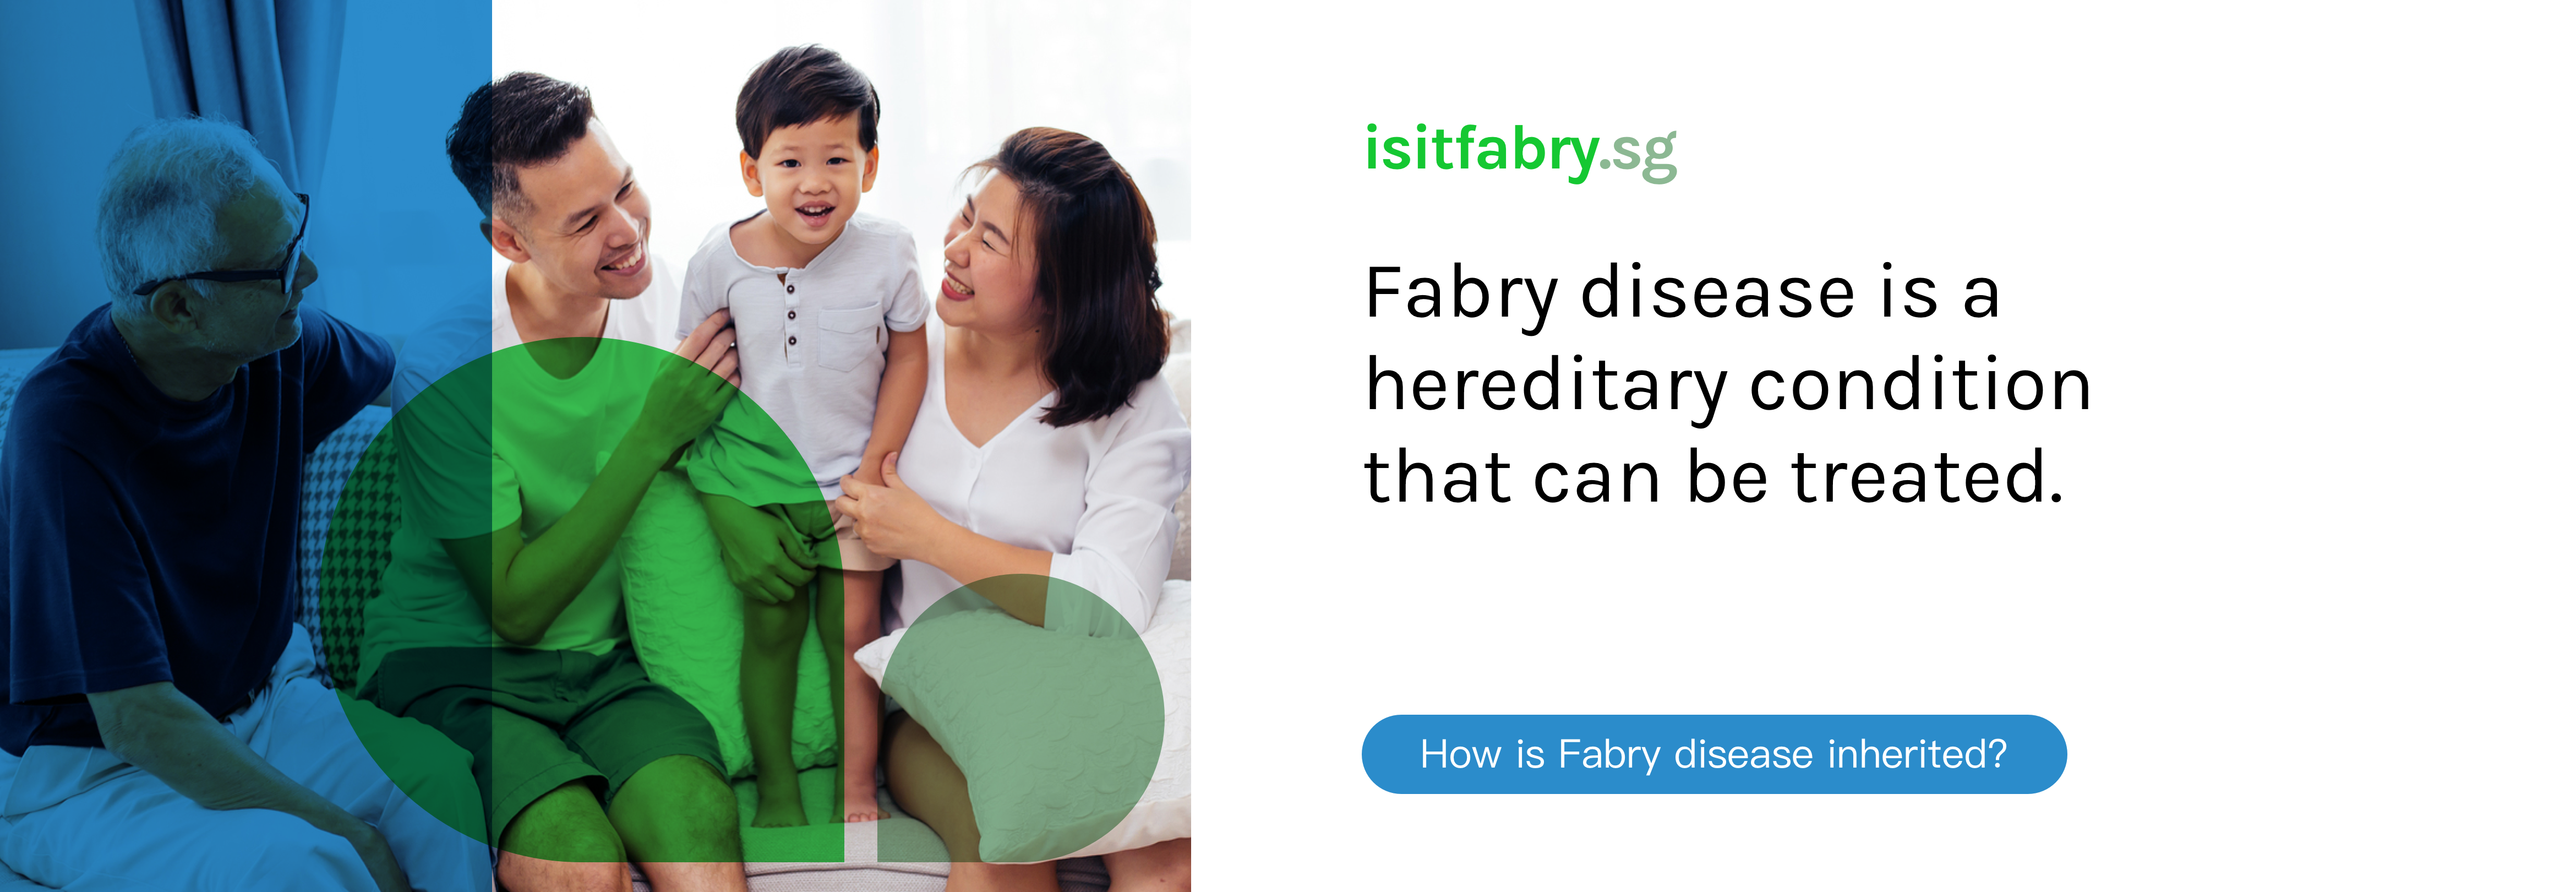 Fabry disease is a hereditary condition that can be treated. Learn more about how Fabry disease is inherited.